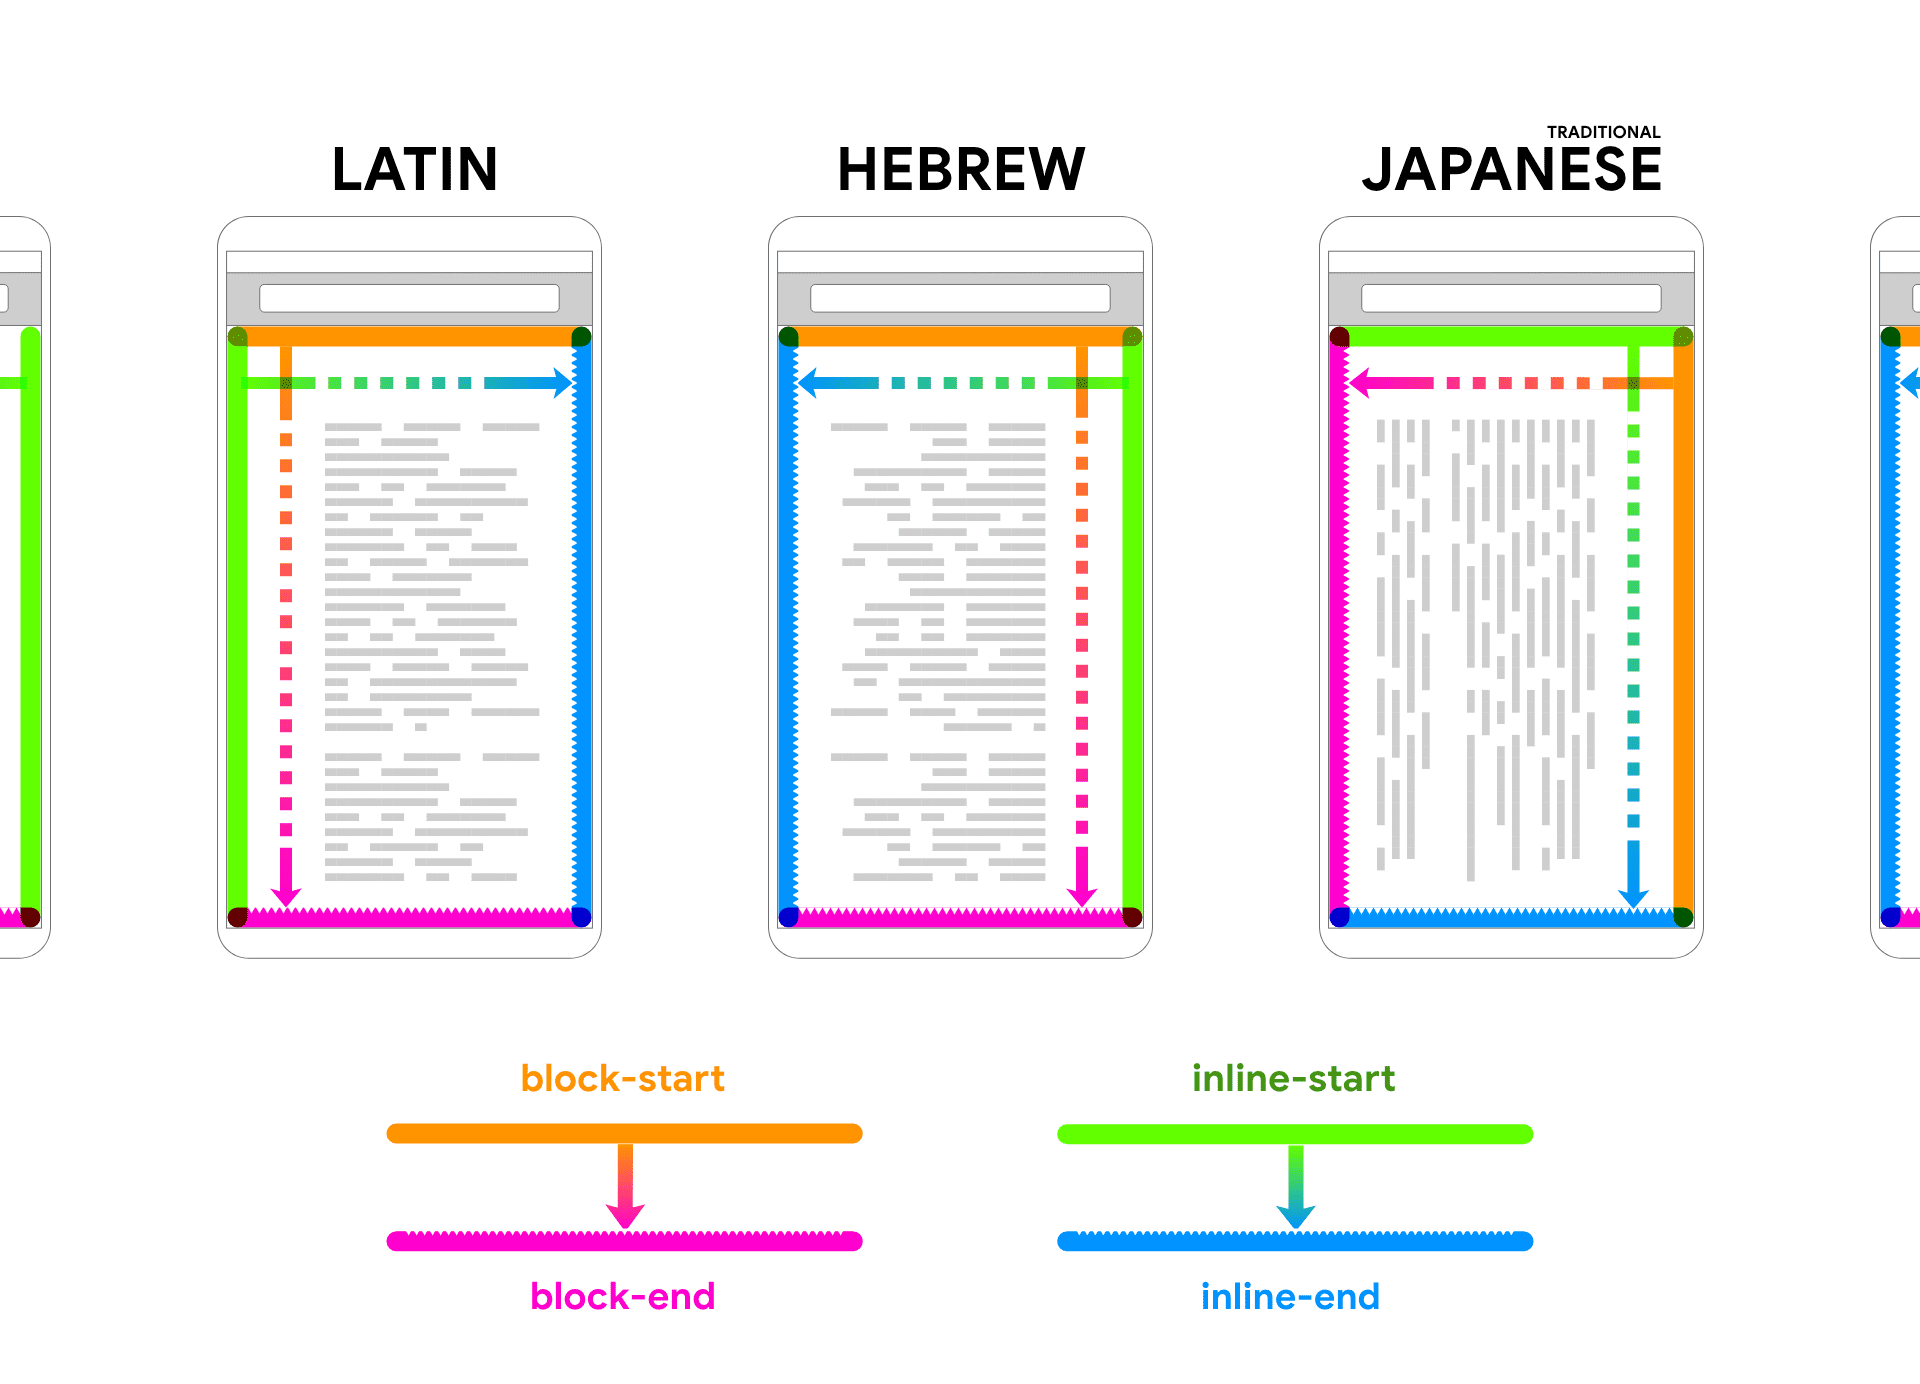 Latin, Hebrew and Japanese are shown rending placeholder text within a device frame. Arrows and colors follow the text to help associate the 2 directions of block and inline.